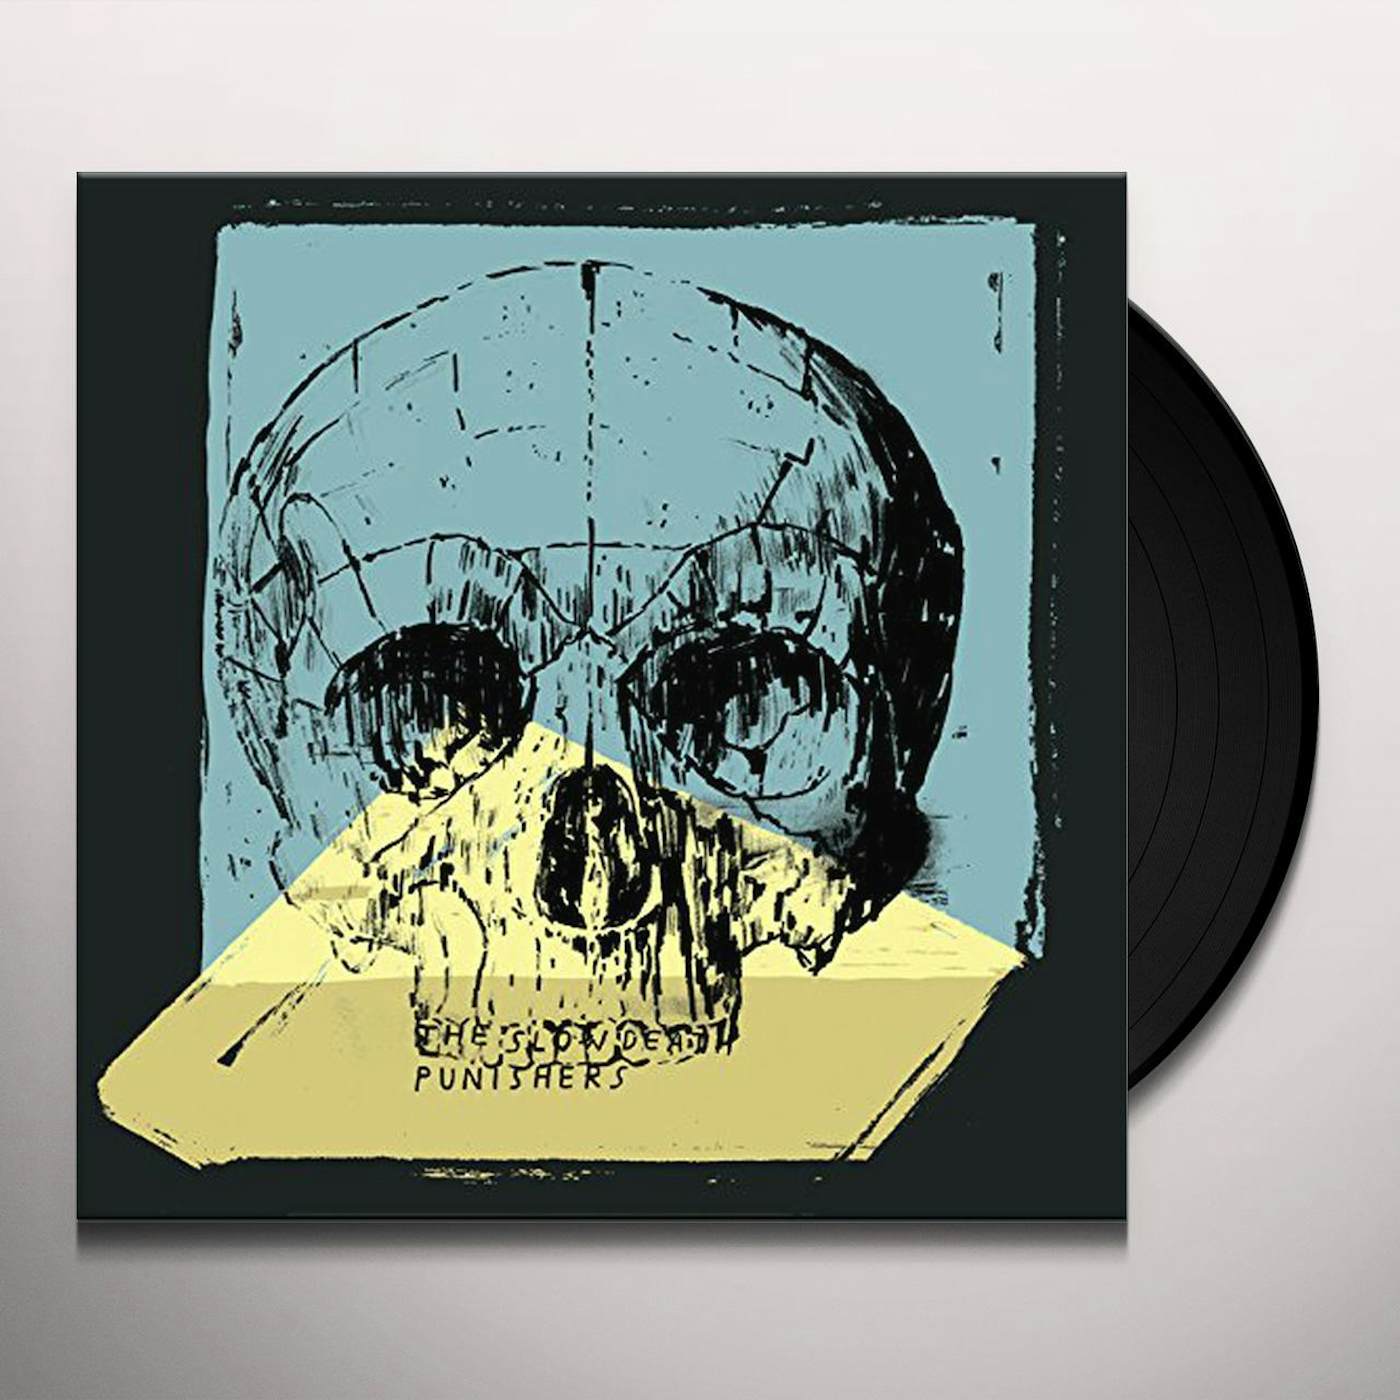 The Slow Death Punishers Vinyl Record